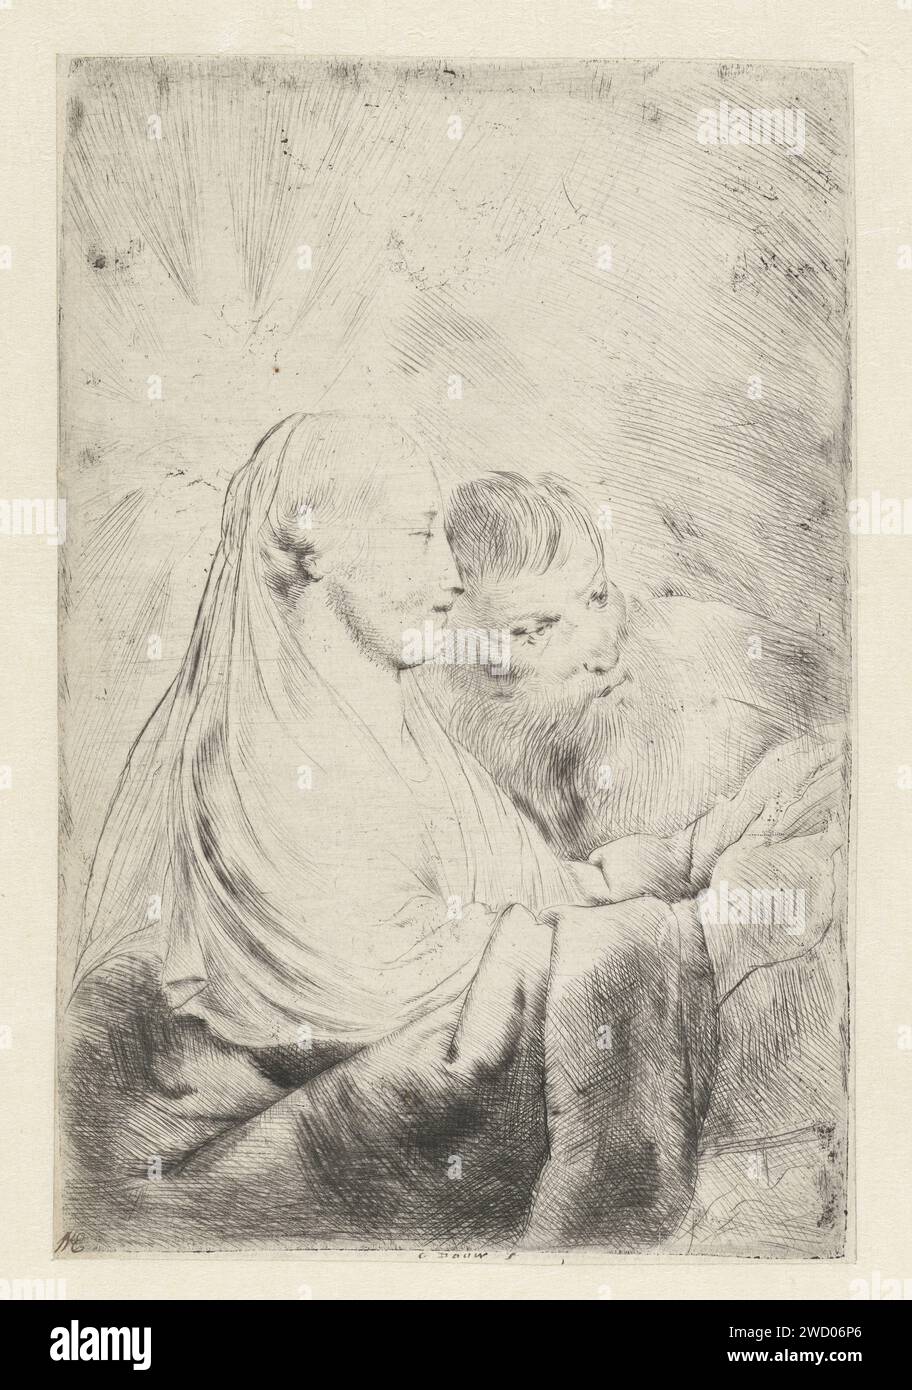 Maria and Joseph, Pieter Fransz de Grebber, 1610 - 1655 print Maria writes while Joseph watches next to her, the show is not complete Netherlands paper drypoint Mary and Joseph Stock Photo